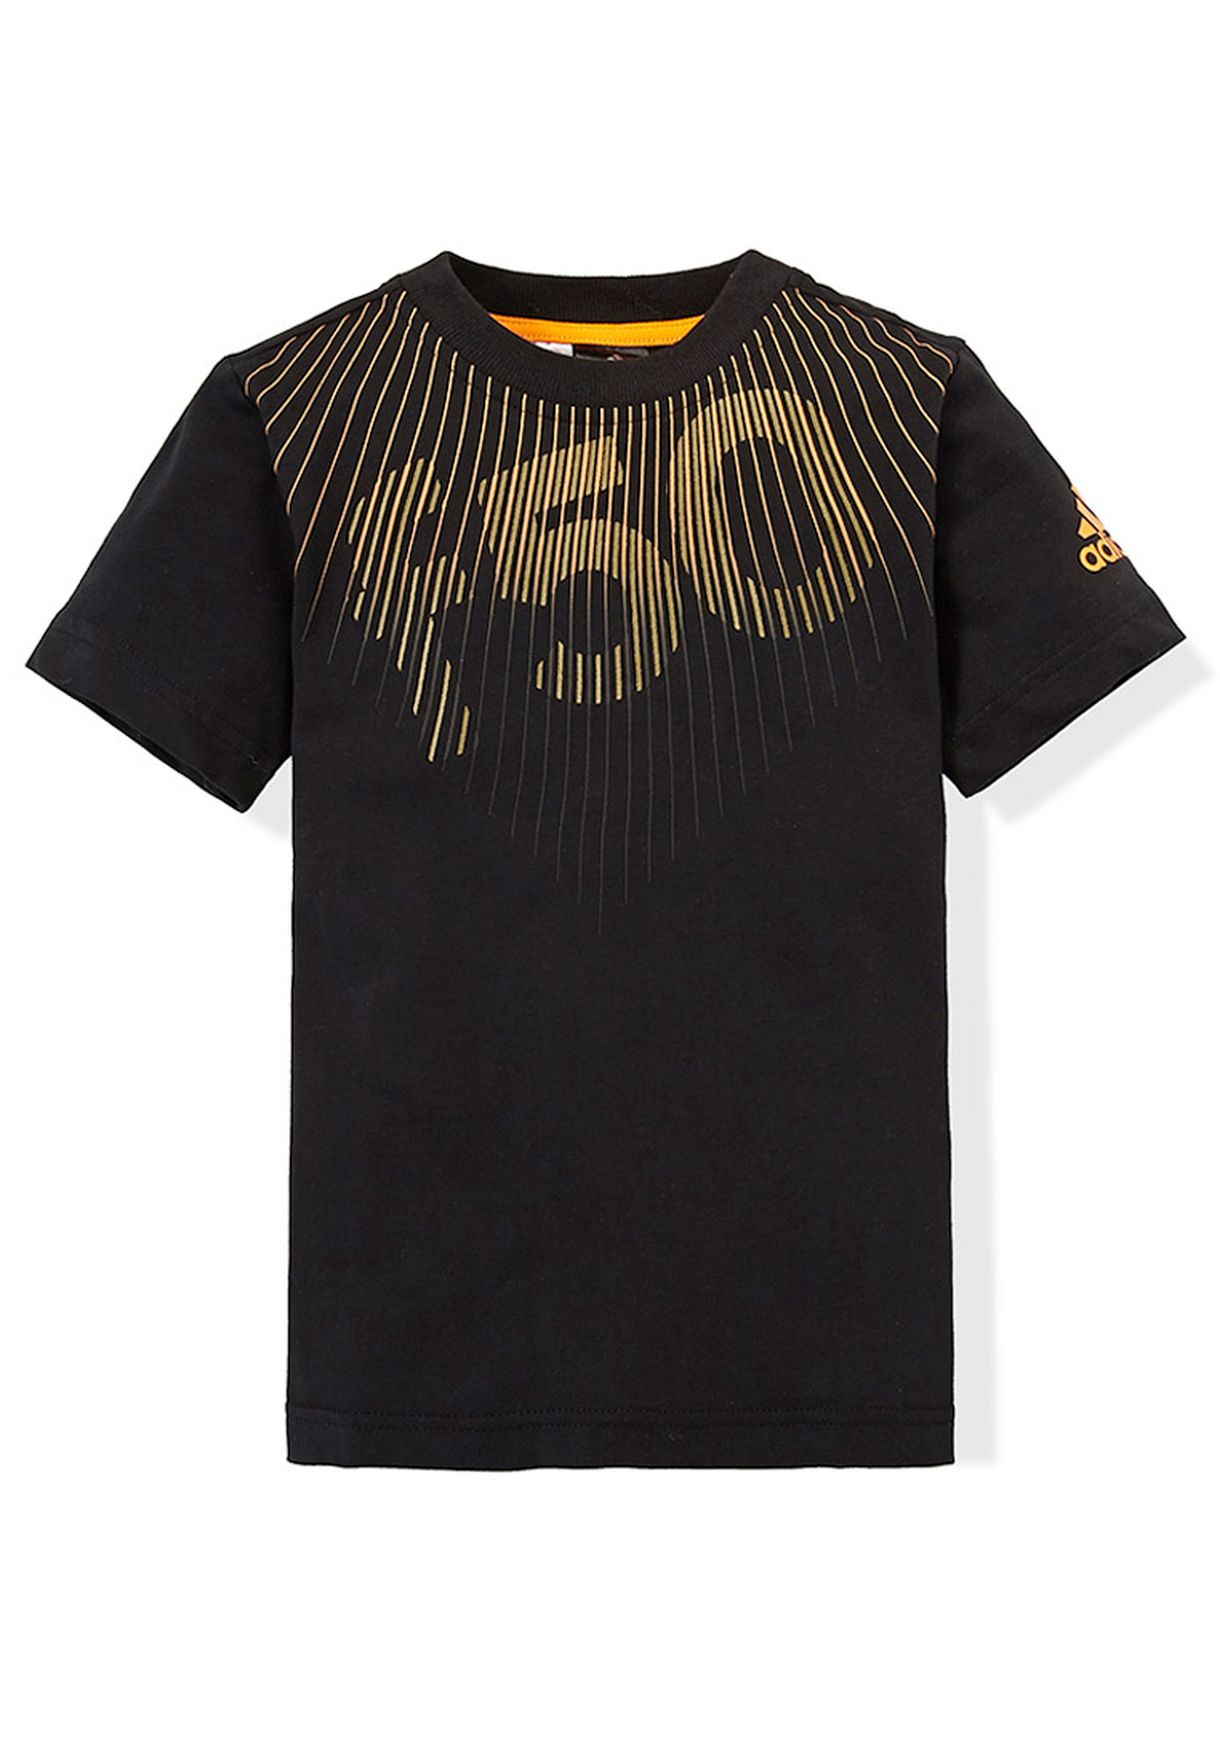 F50 T-Shirt for Kids in MENA, Worldwide 